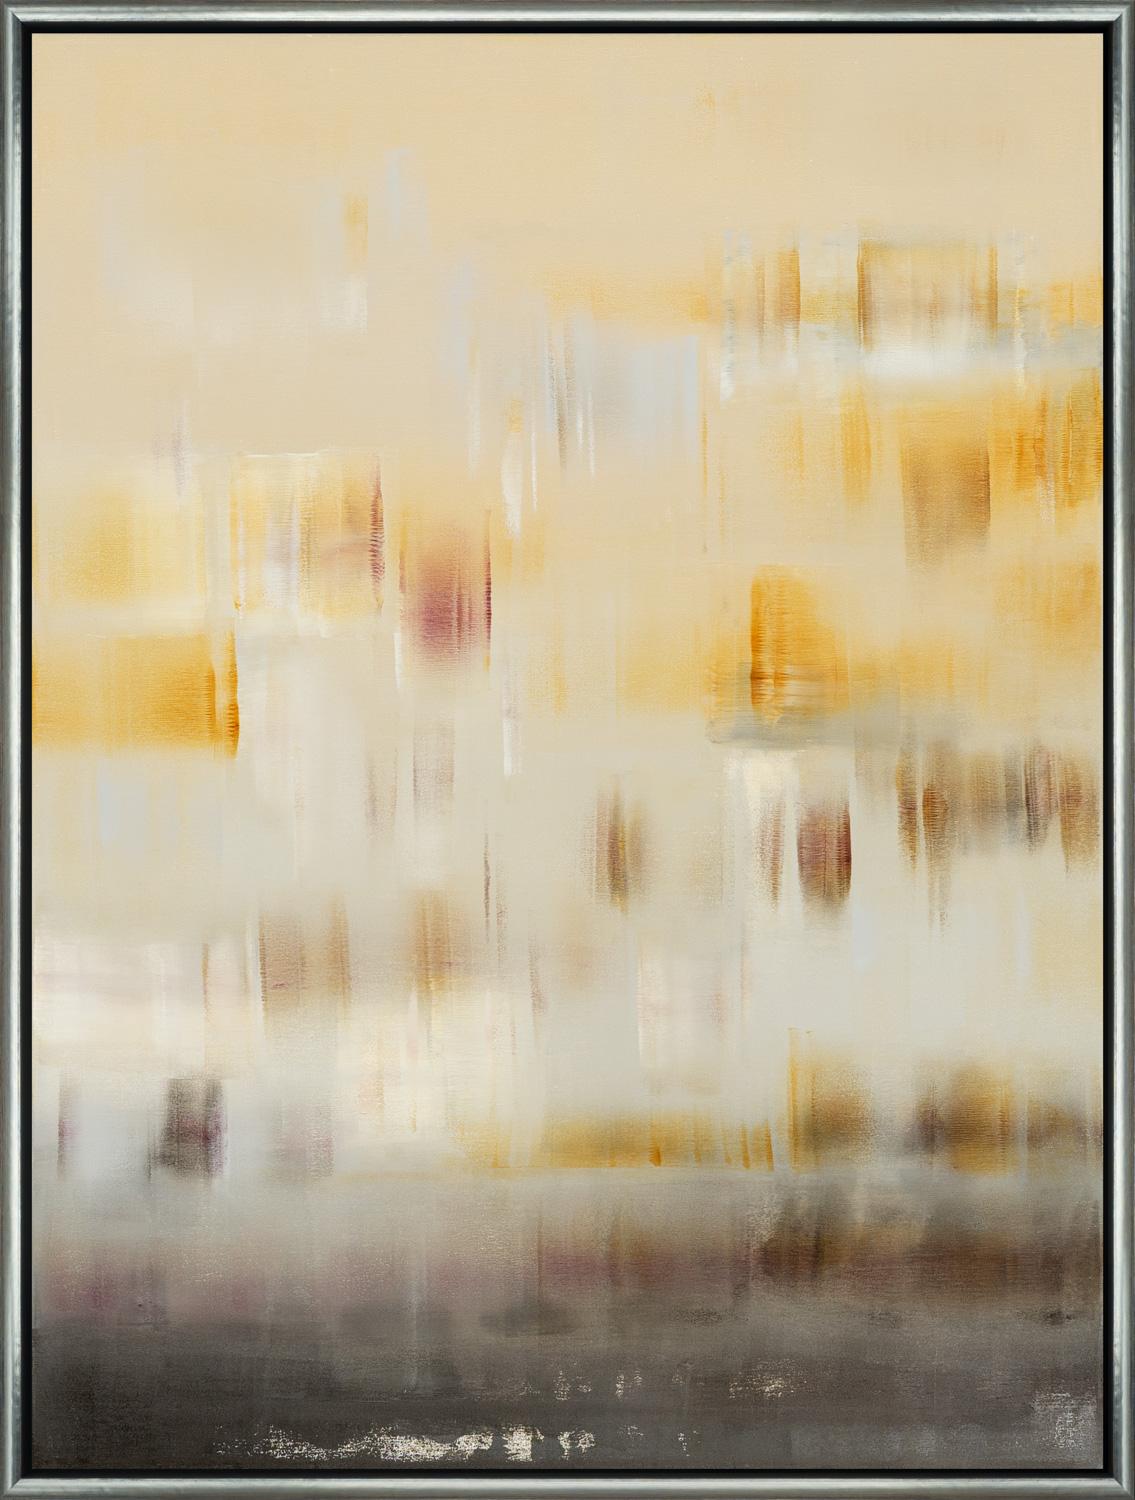 "The Wind Song I" is a framed oil on canvas painting by Shivani Dugar, with abstract shapes and a mix of warm yellow ochre and deep violet tones. Dugar's application of the paint creates a balance with rich texture, the combination of vertical